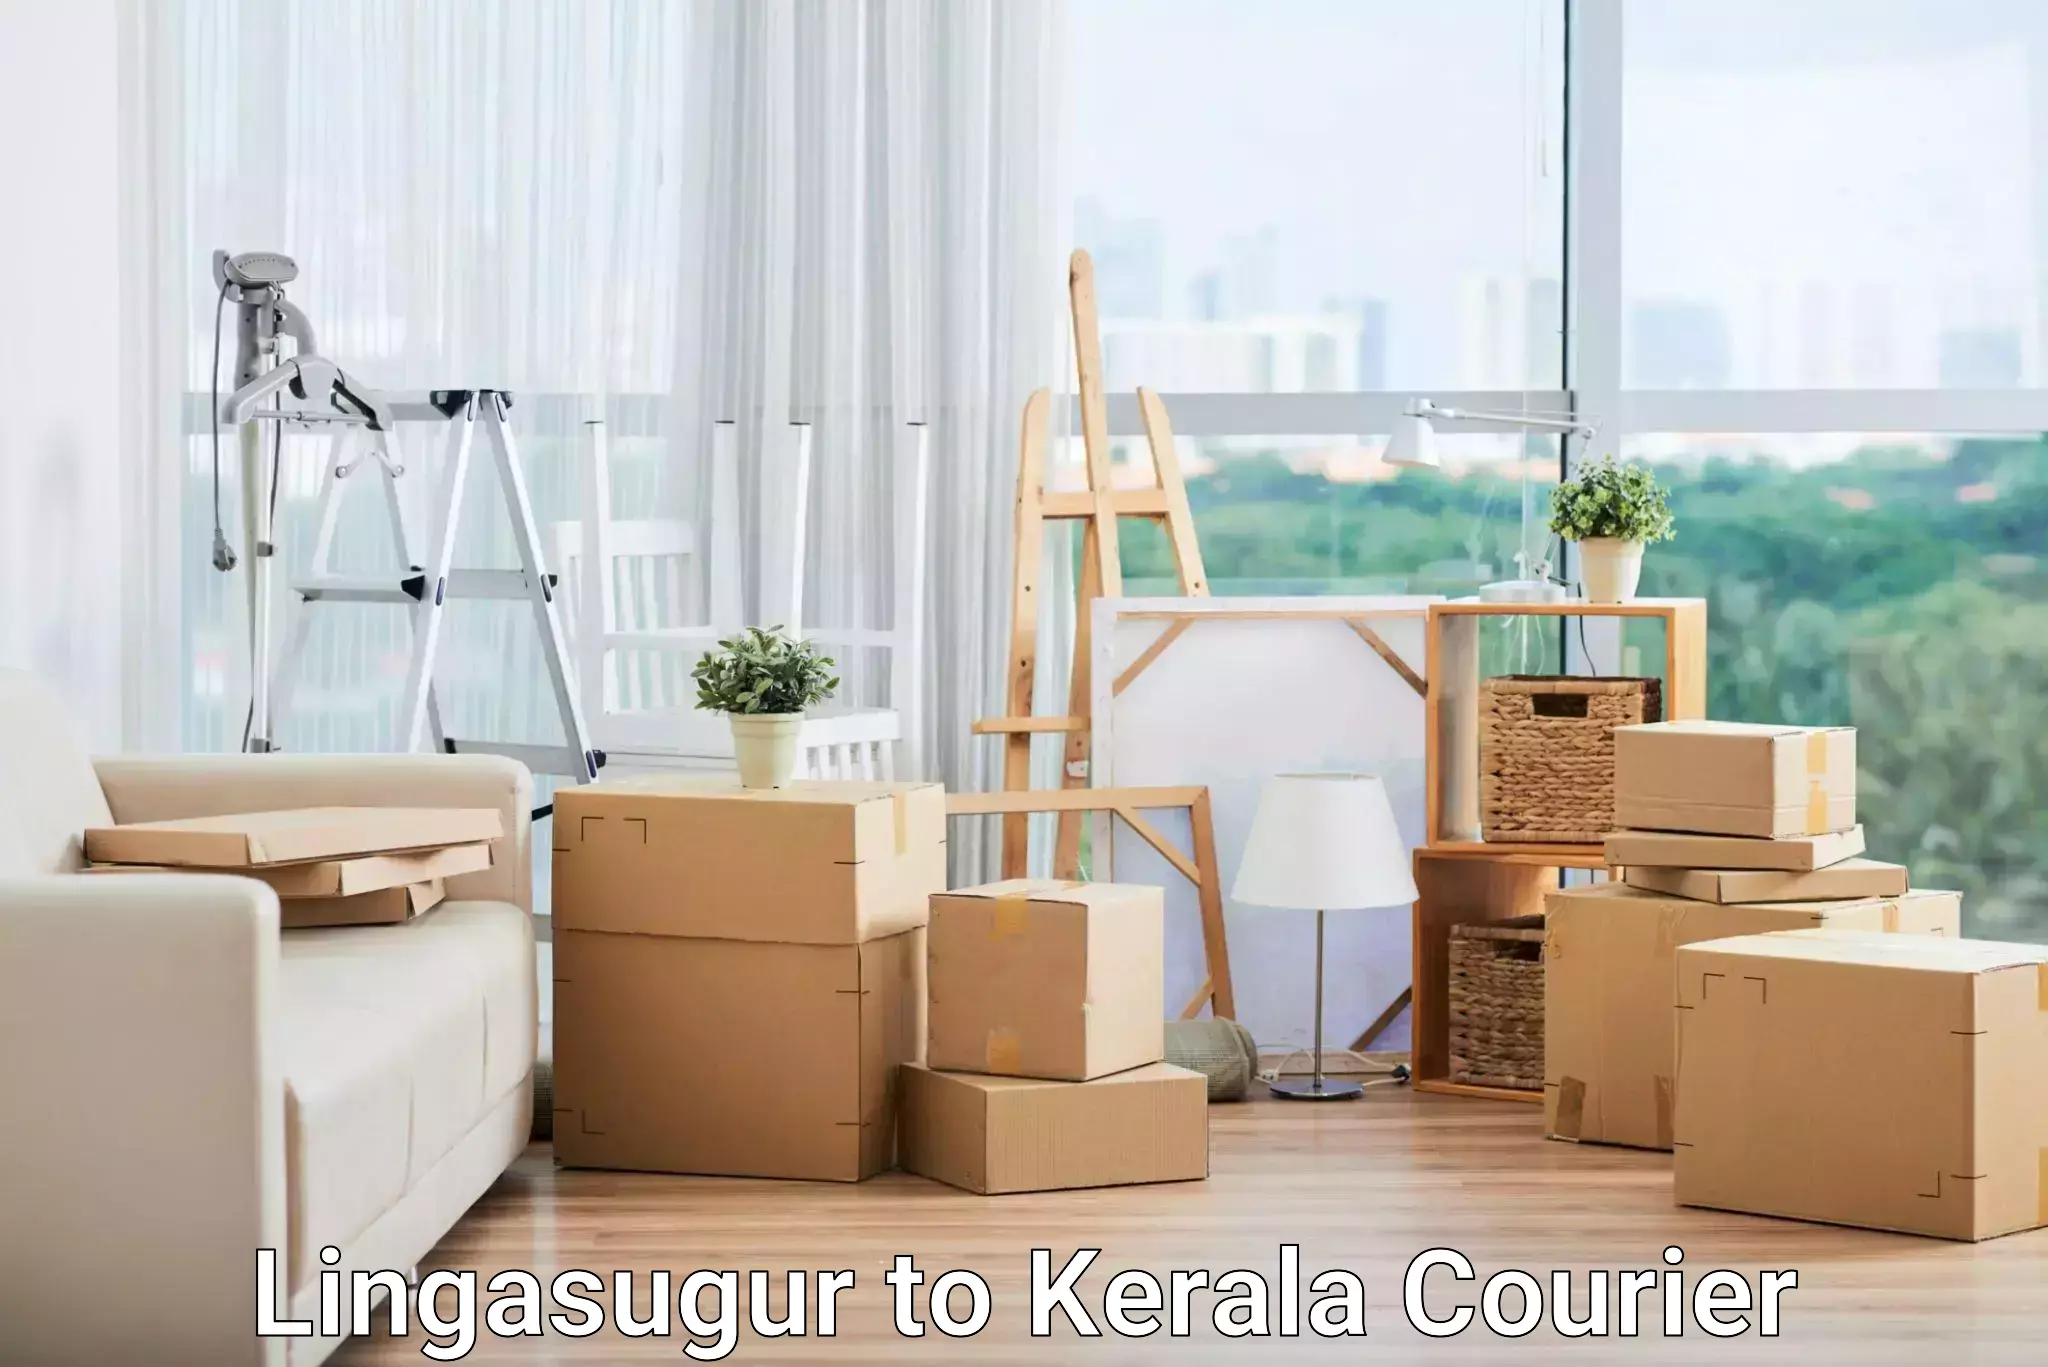 Same-day delivery solutions Lingasugur to Kuttikol